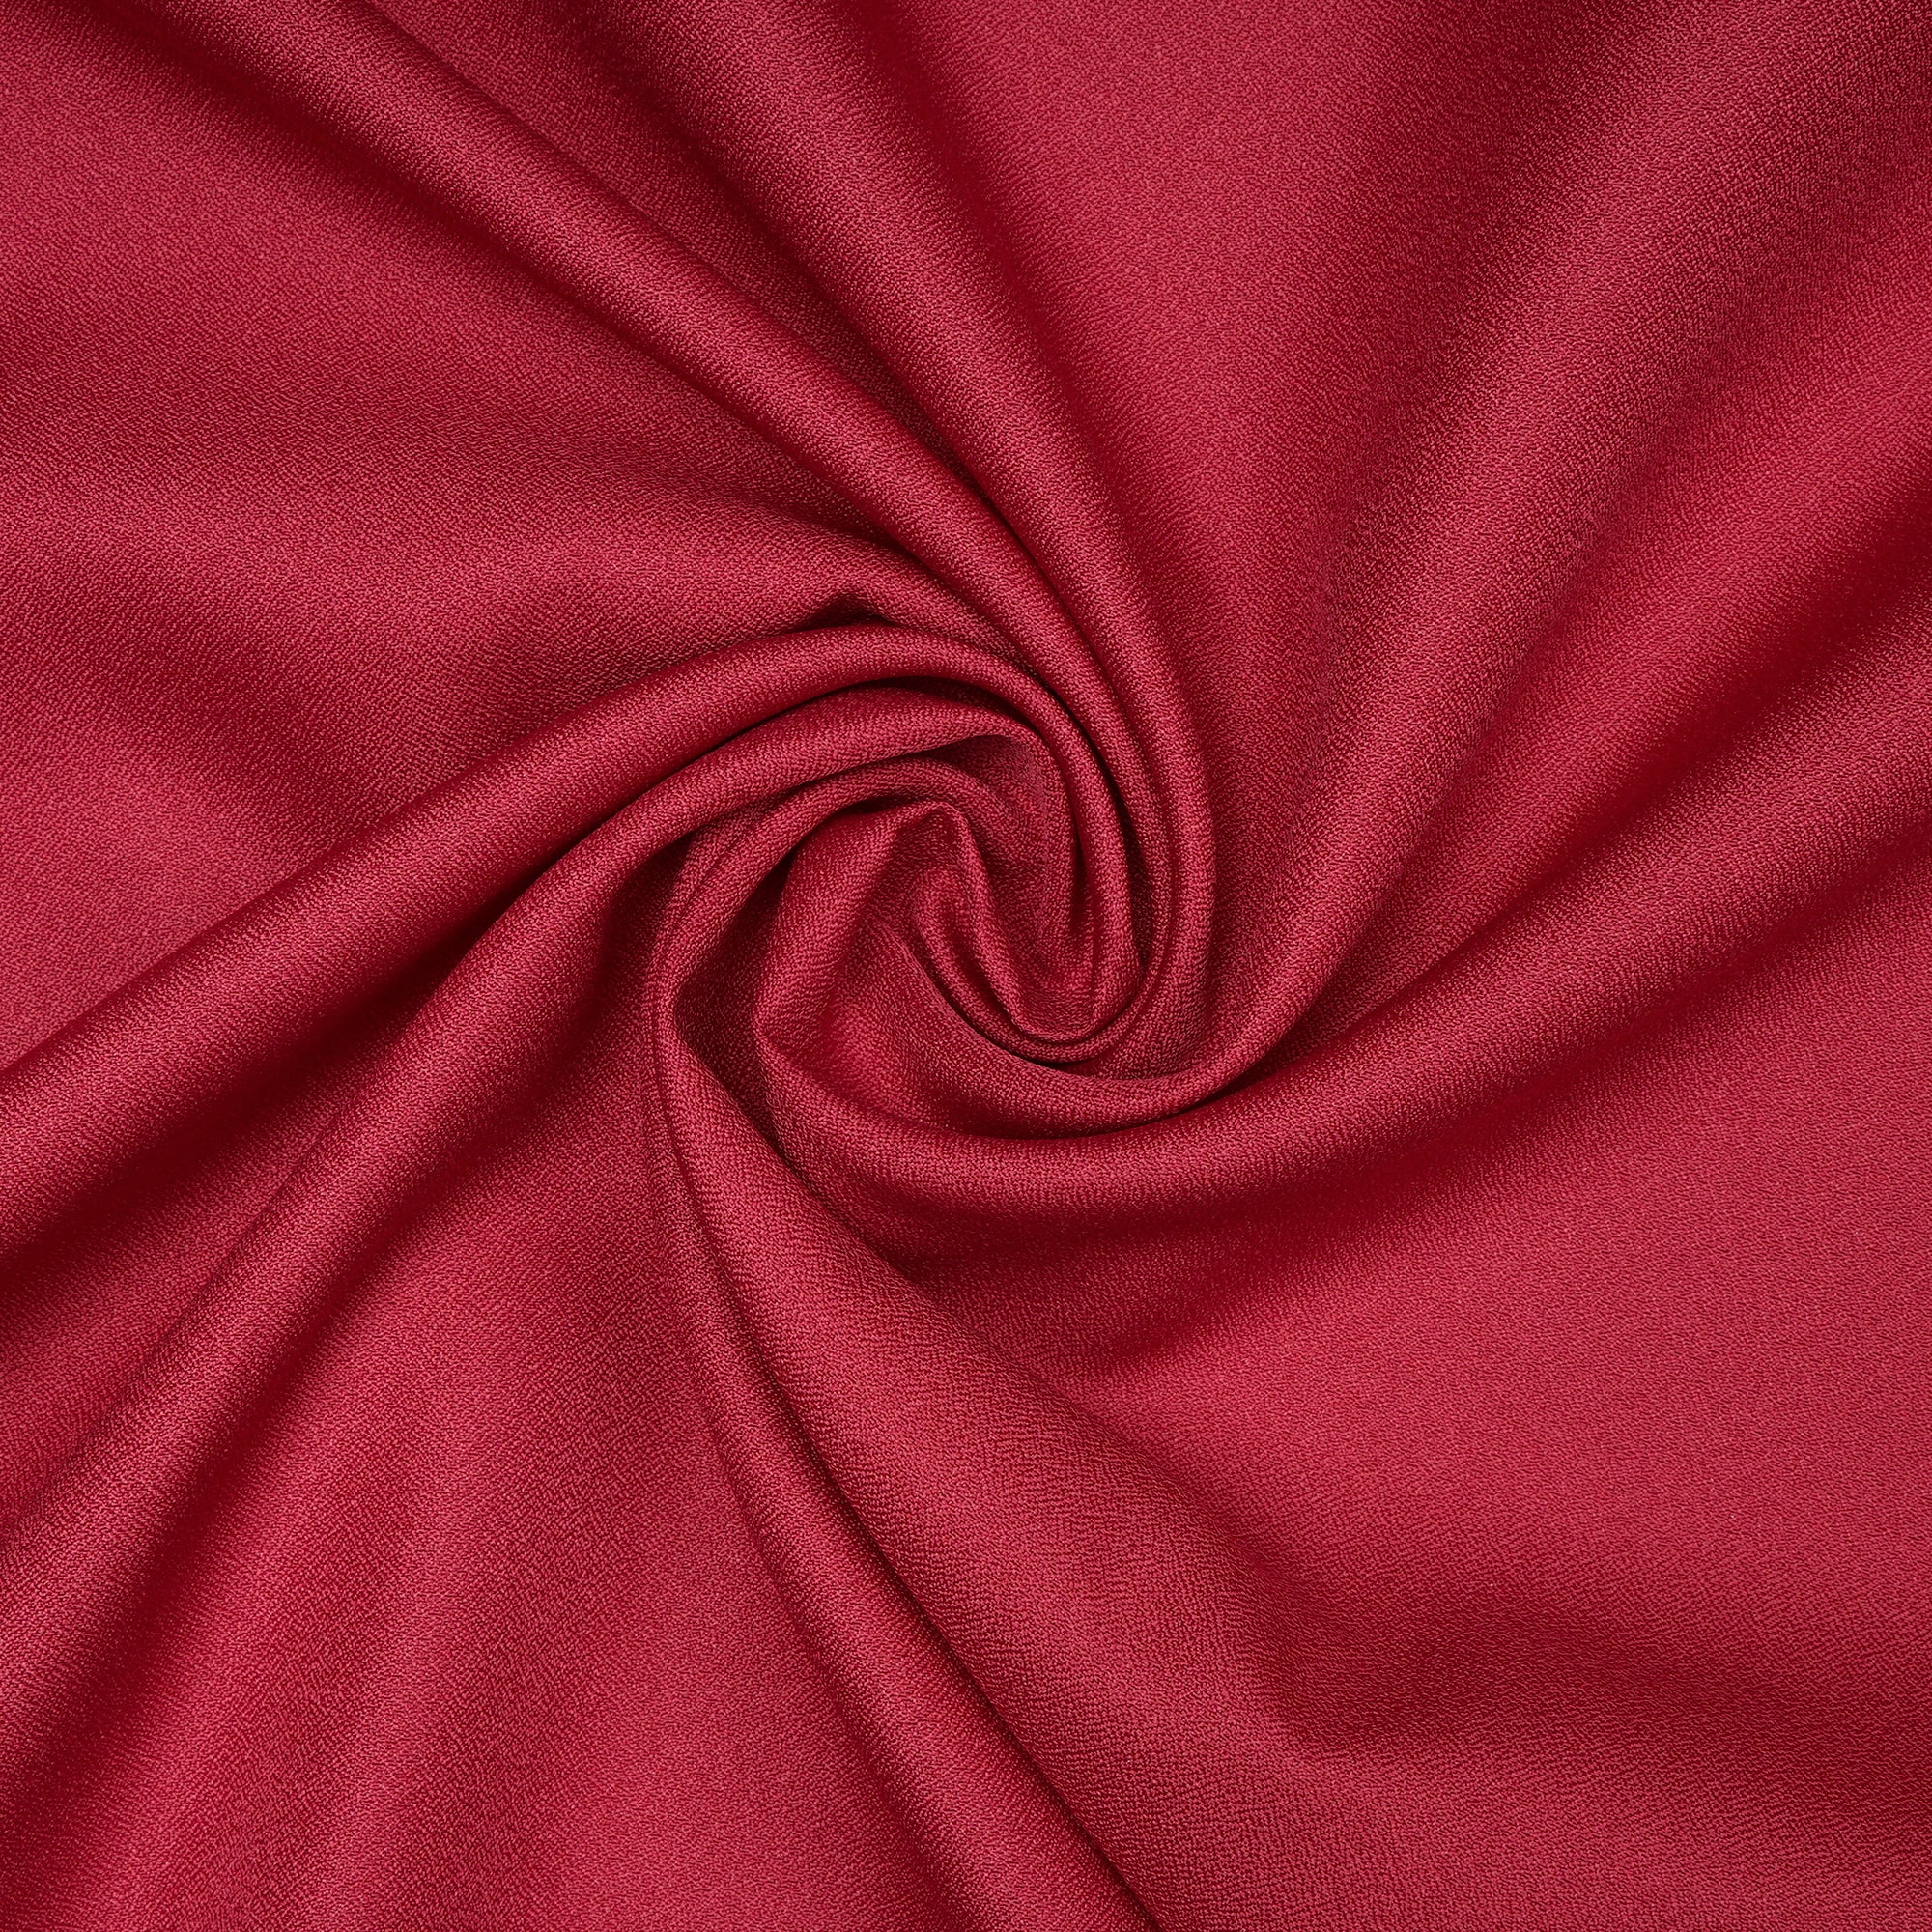 Maroon Solid Dyed Imported Amazon Moss Crepe Fabric (60" Width)